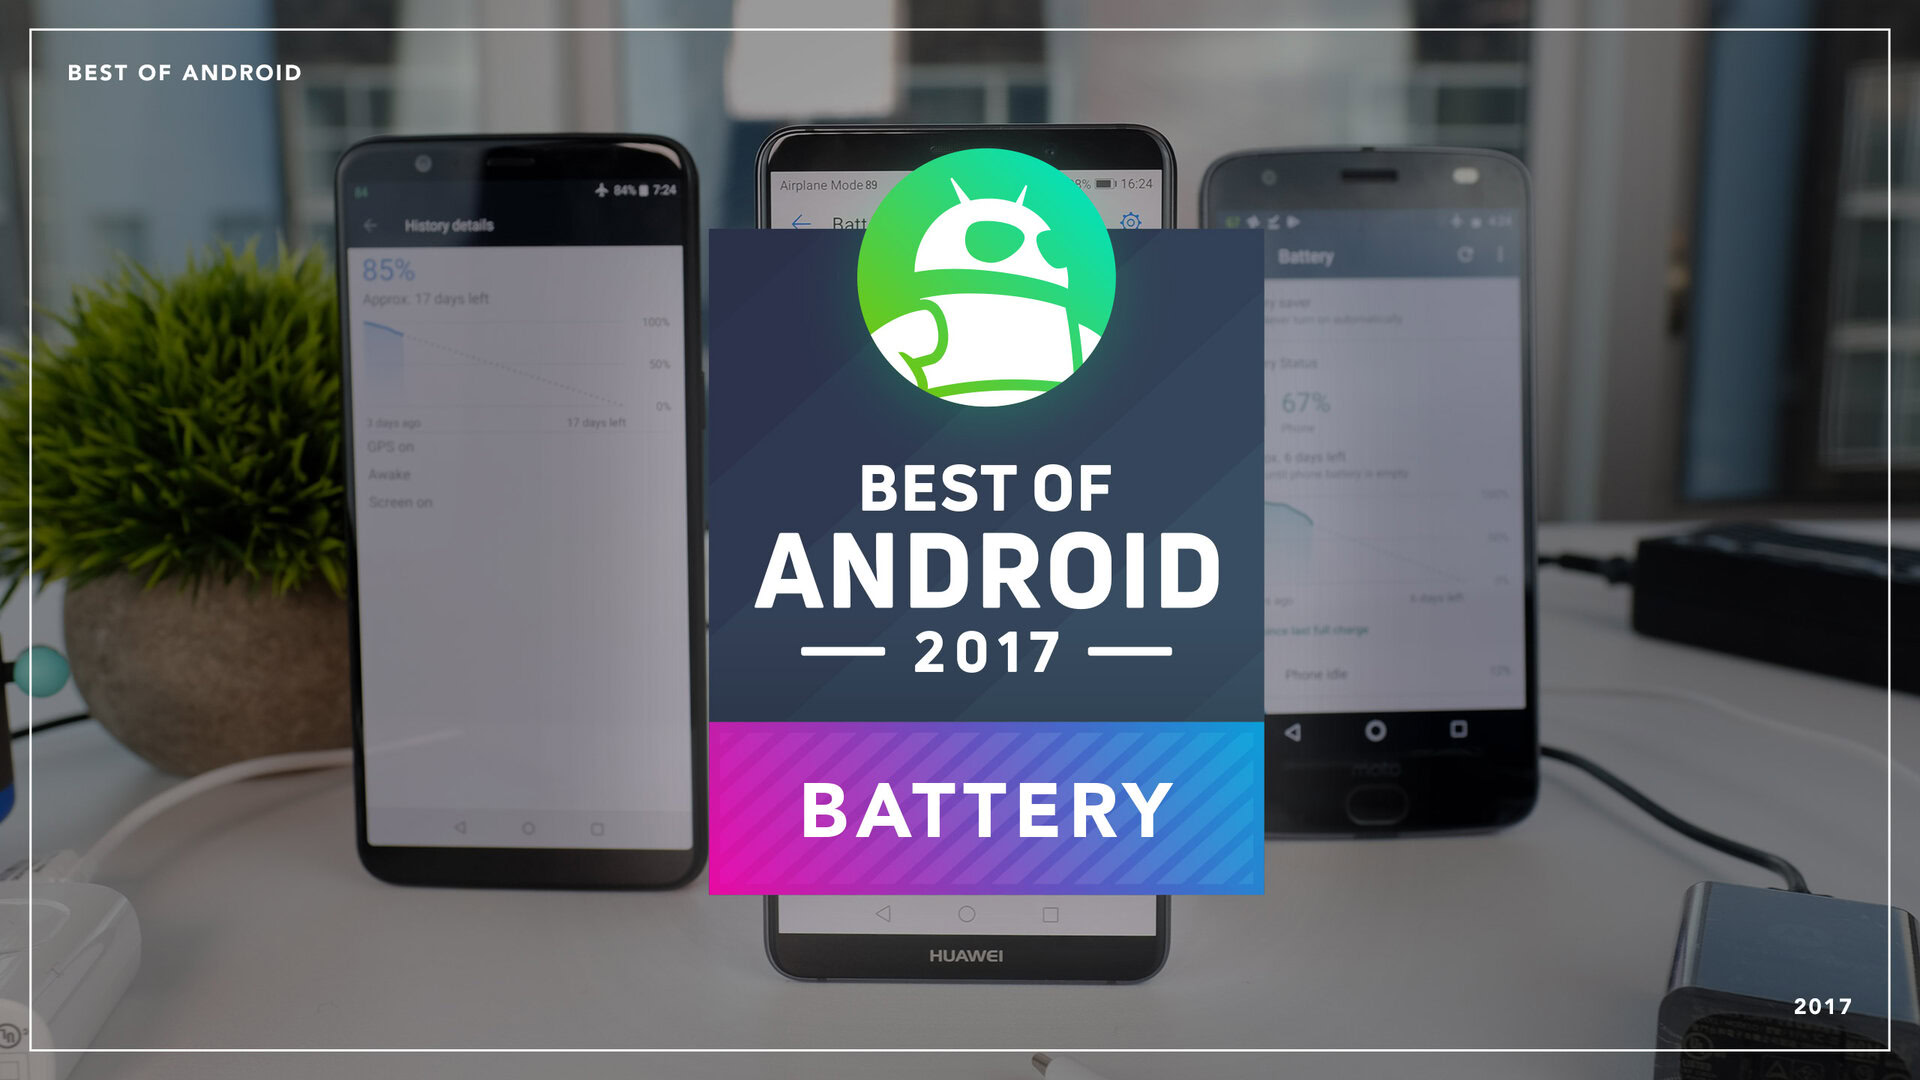 Best of Android 2017 – Which phone has the longest battery life?